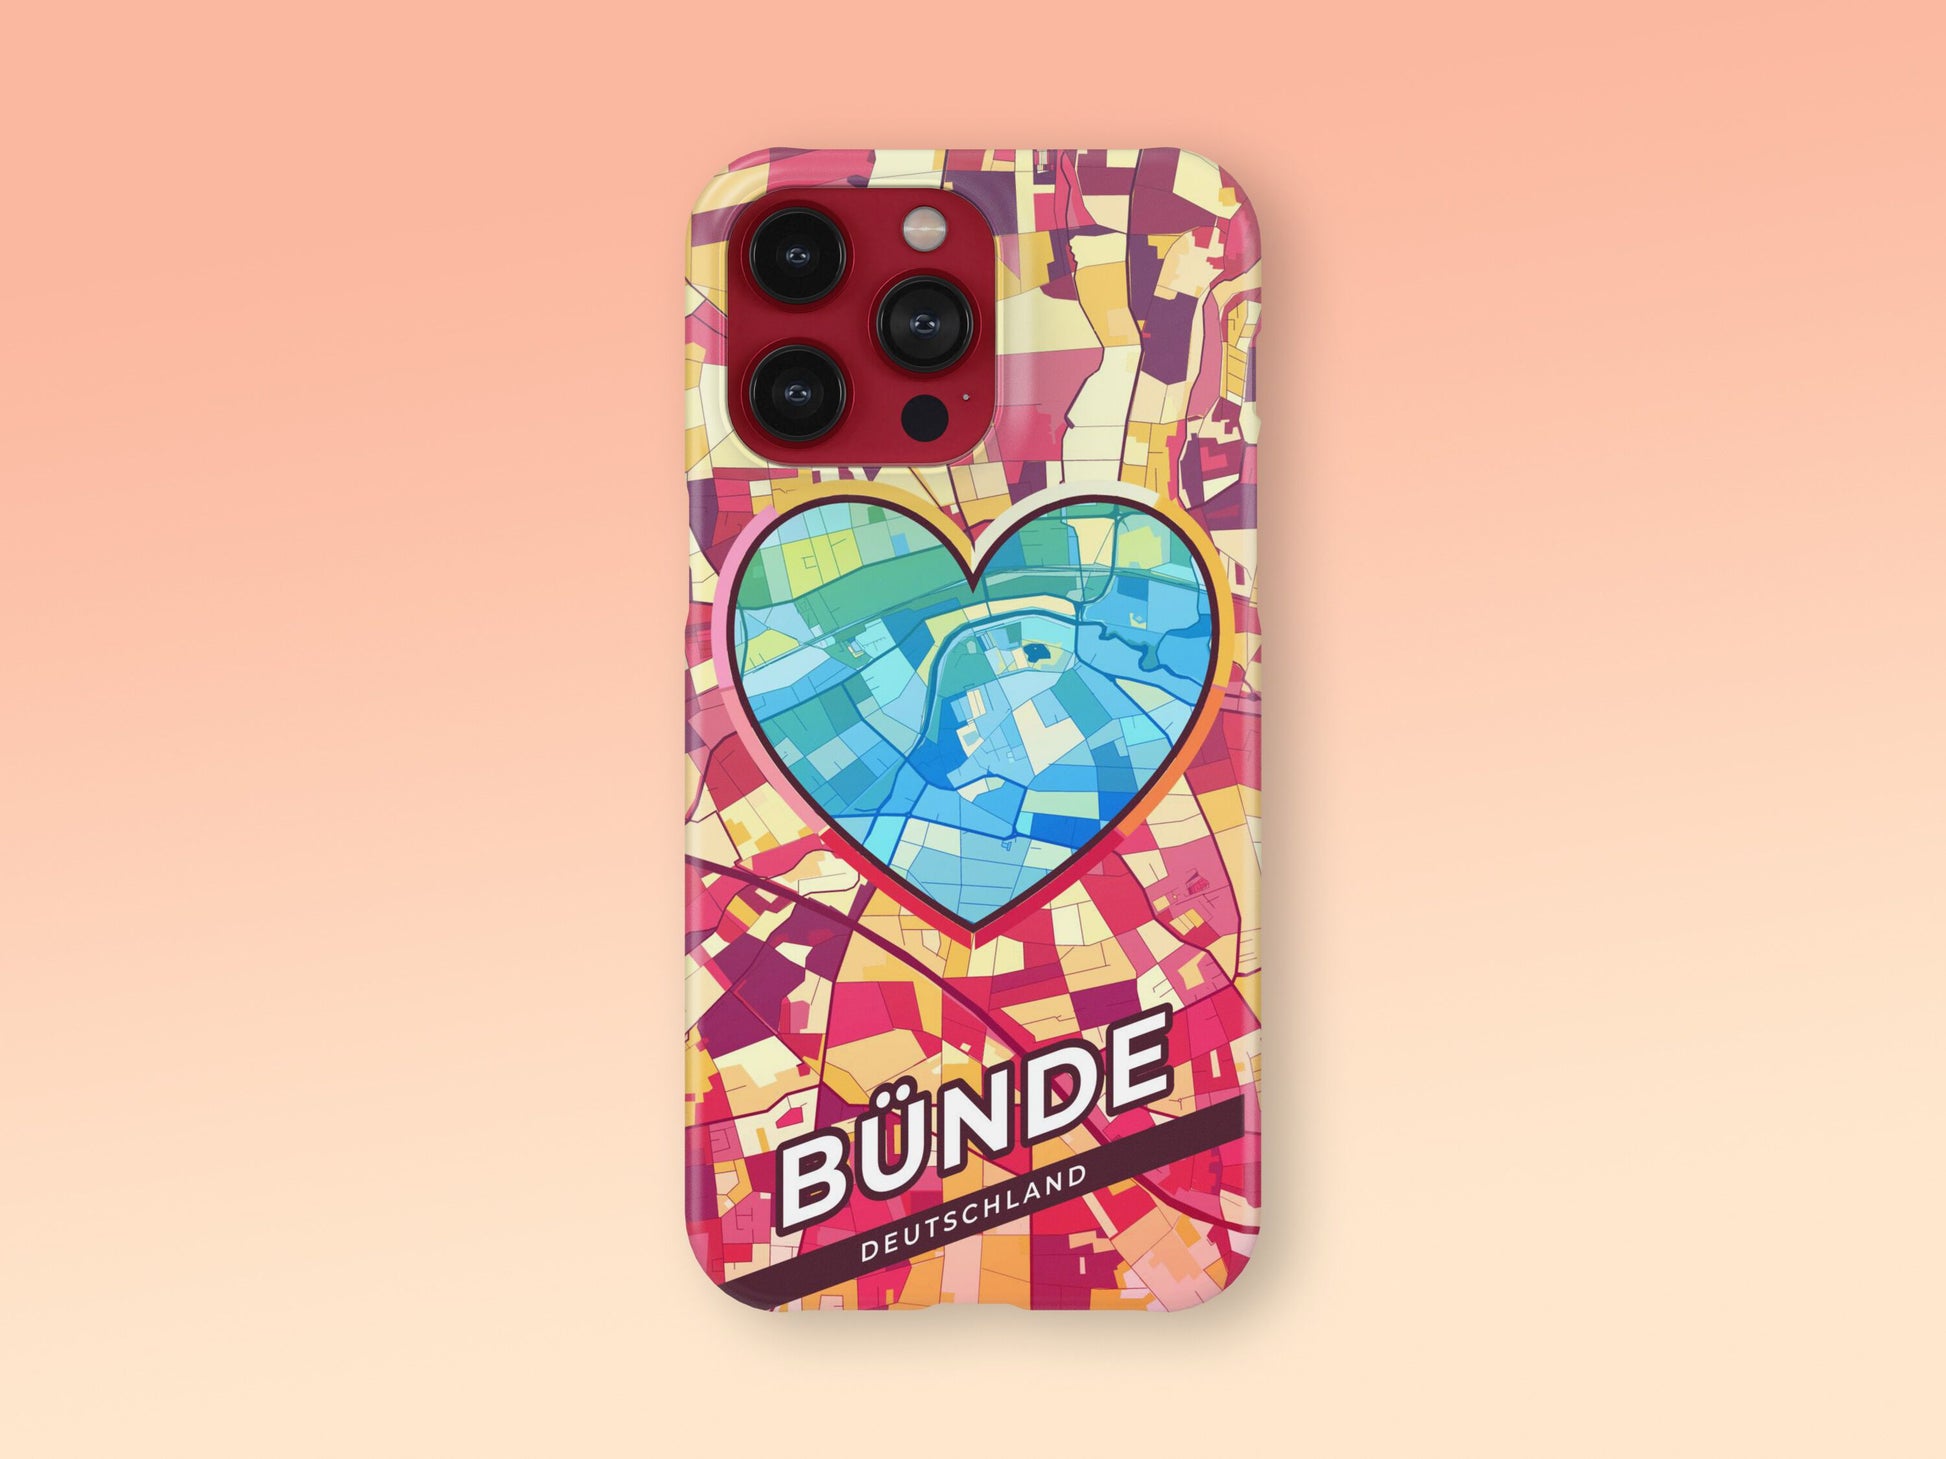 Bünde Deutschland slim phone case with colorful icon. Birthday, wedding or housewarming gift. Couple match cases. 2